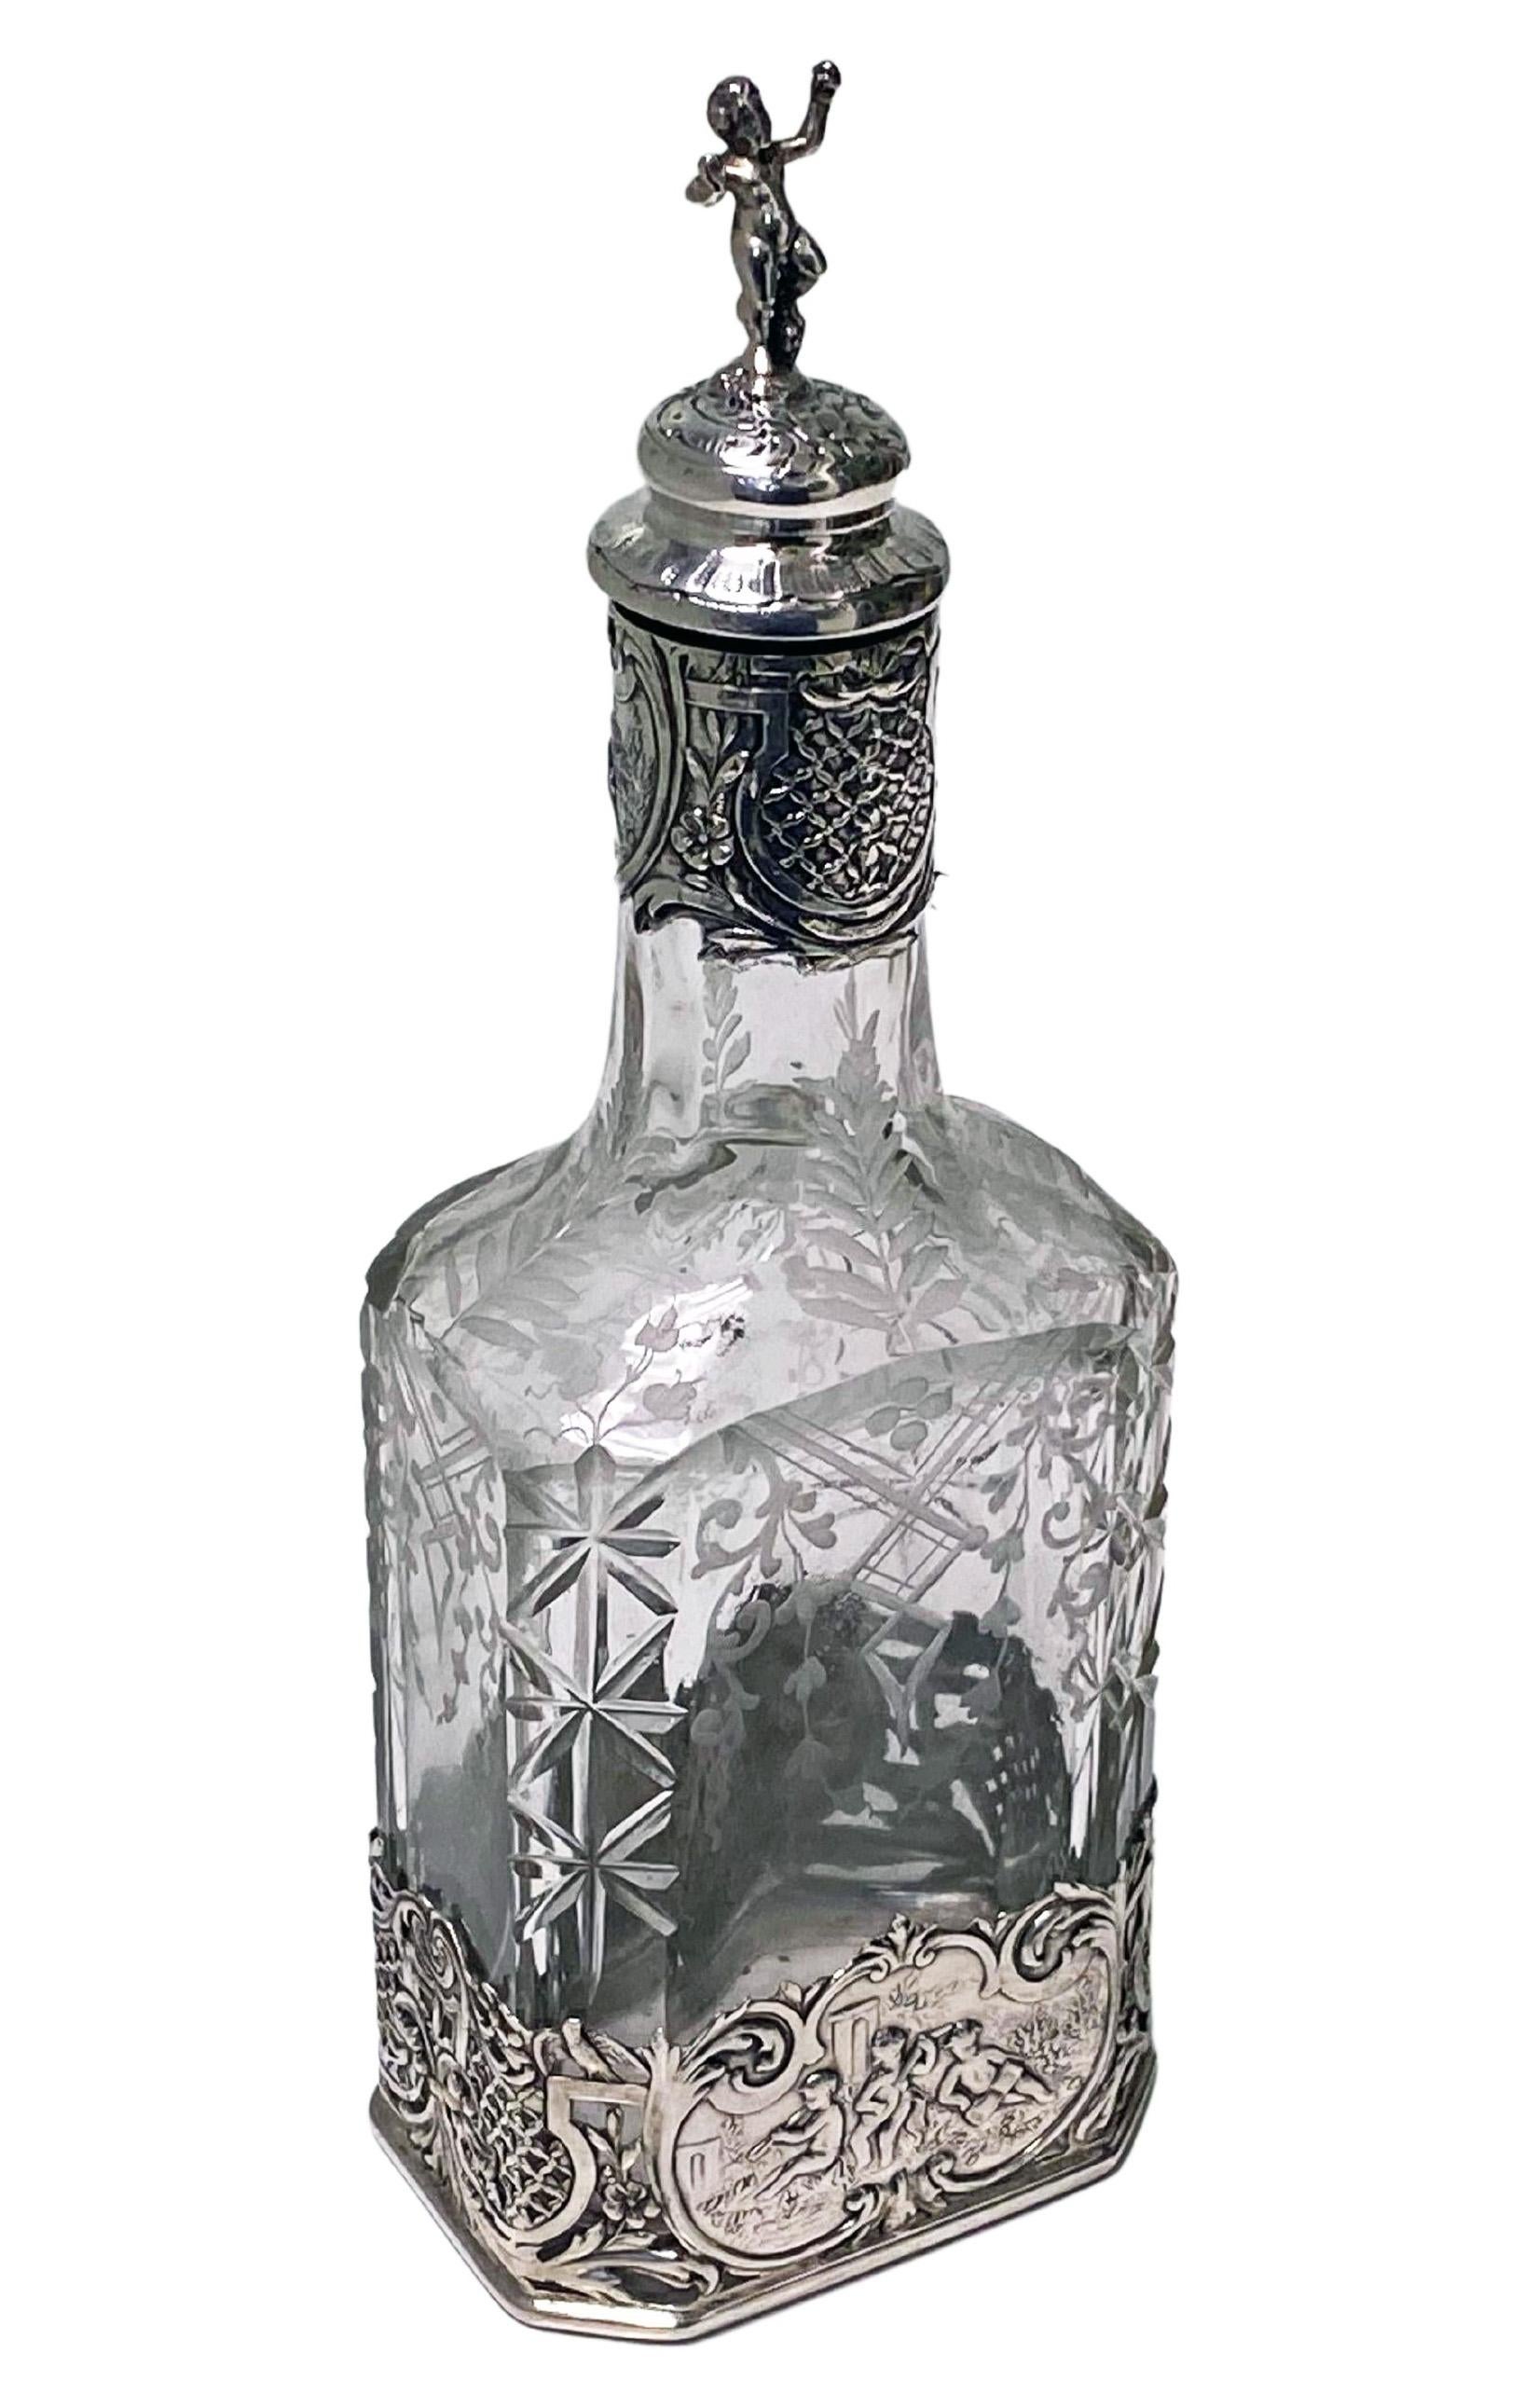 Silver and glass decanter for oil or other dressing, Hanau circa 1890, Storck and Sinsheimer. Octagional cut glass cylindrical neck, double-sided acid-etched foliate motif decoration to the glass. Removeable silver bottom mount with pierced and